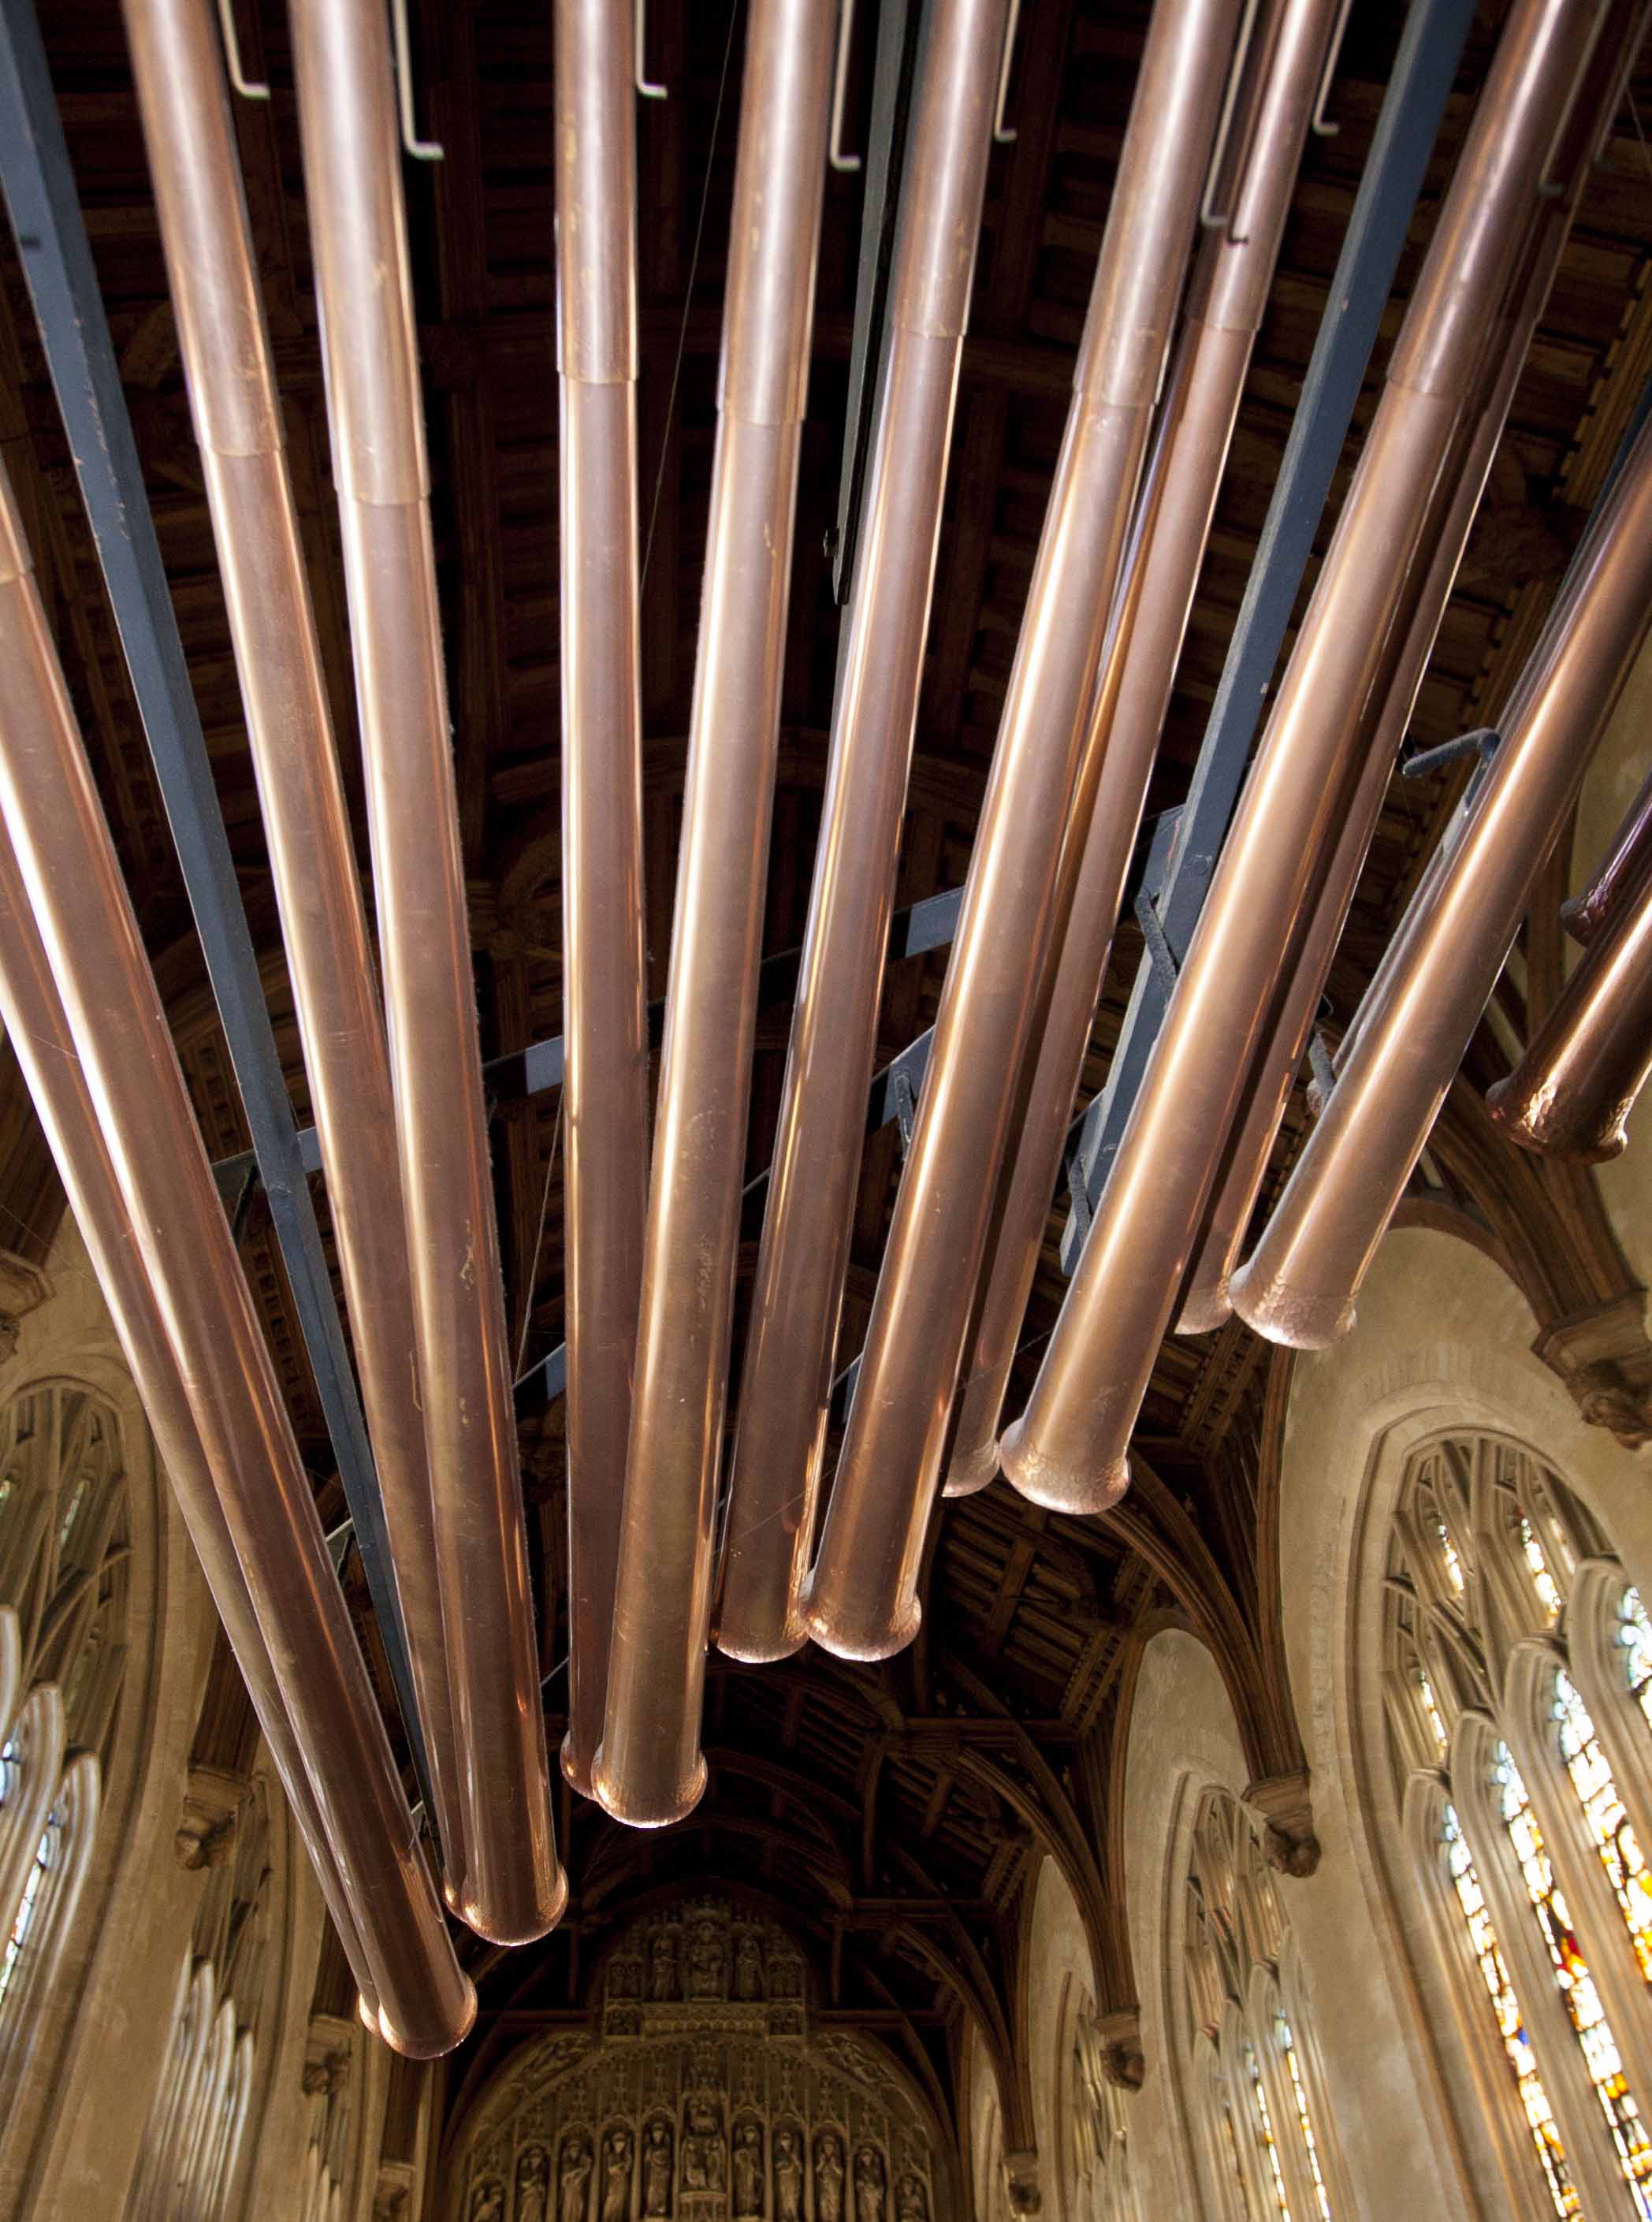 the pipes of the chapel organ